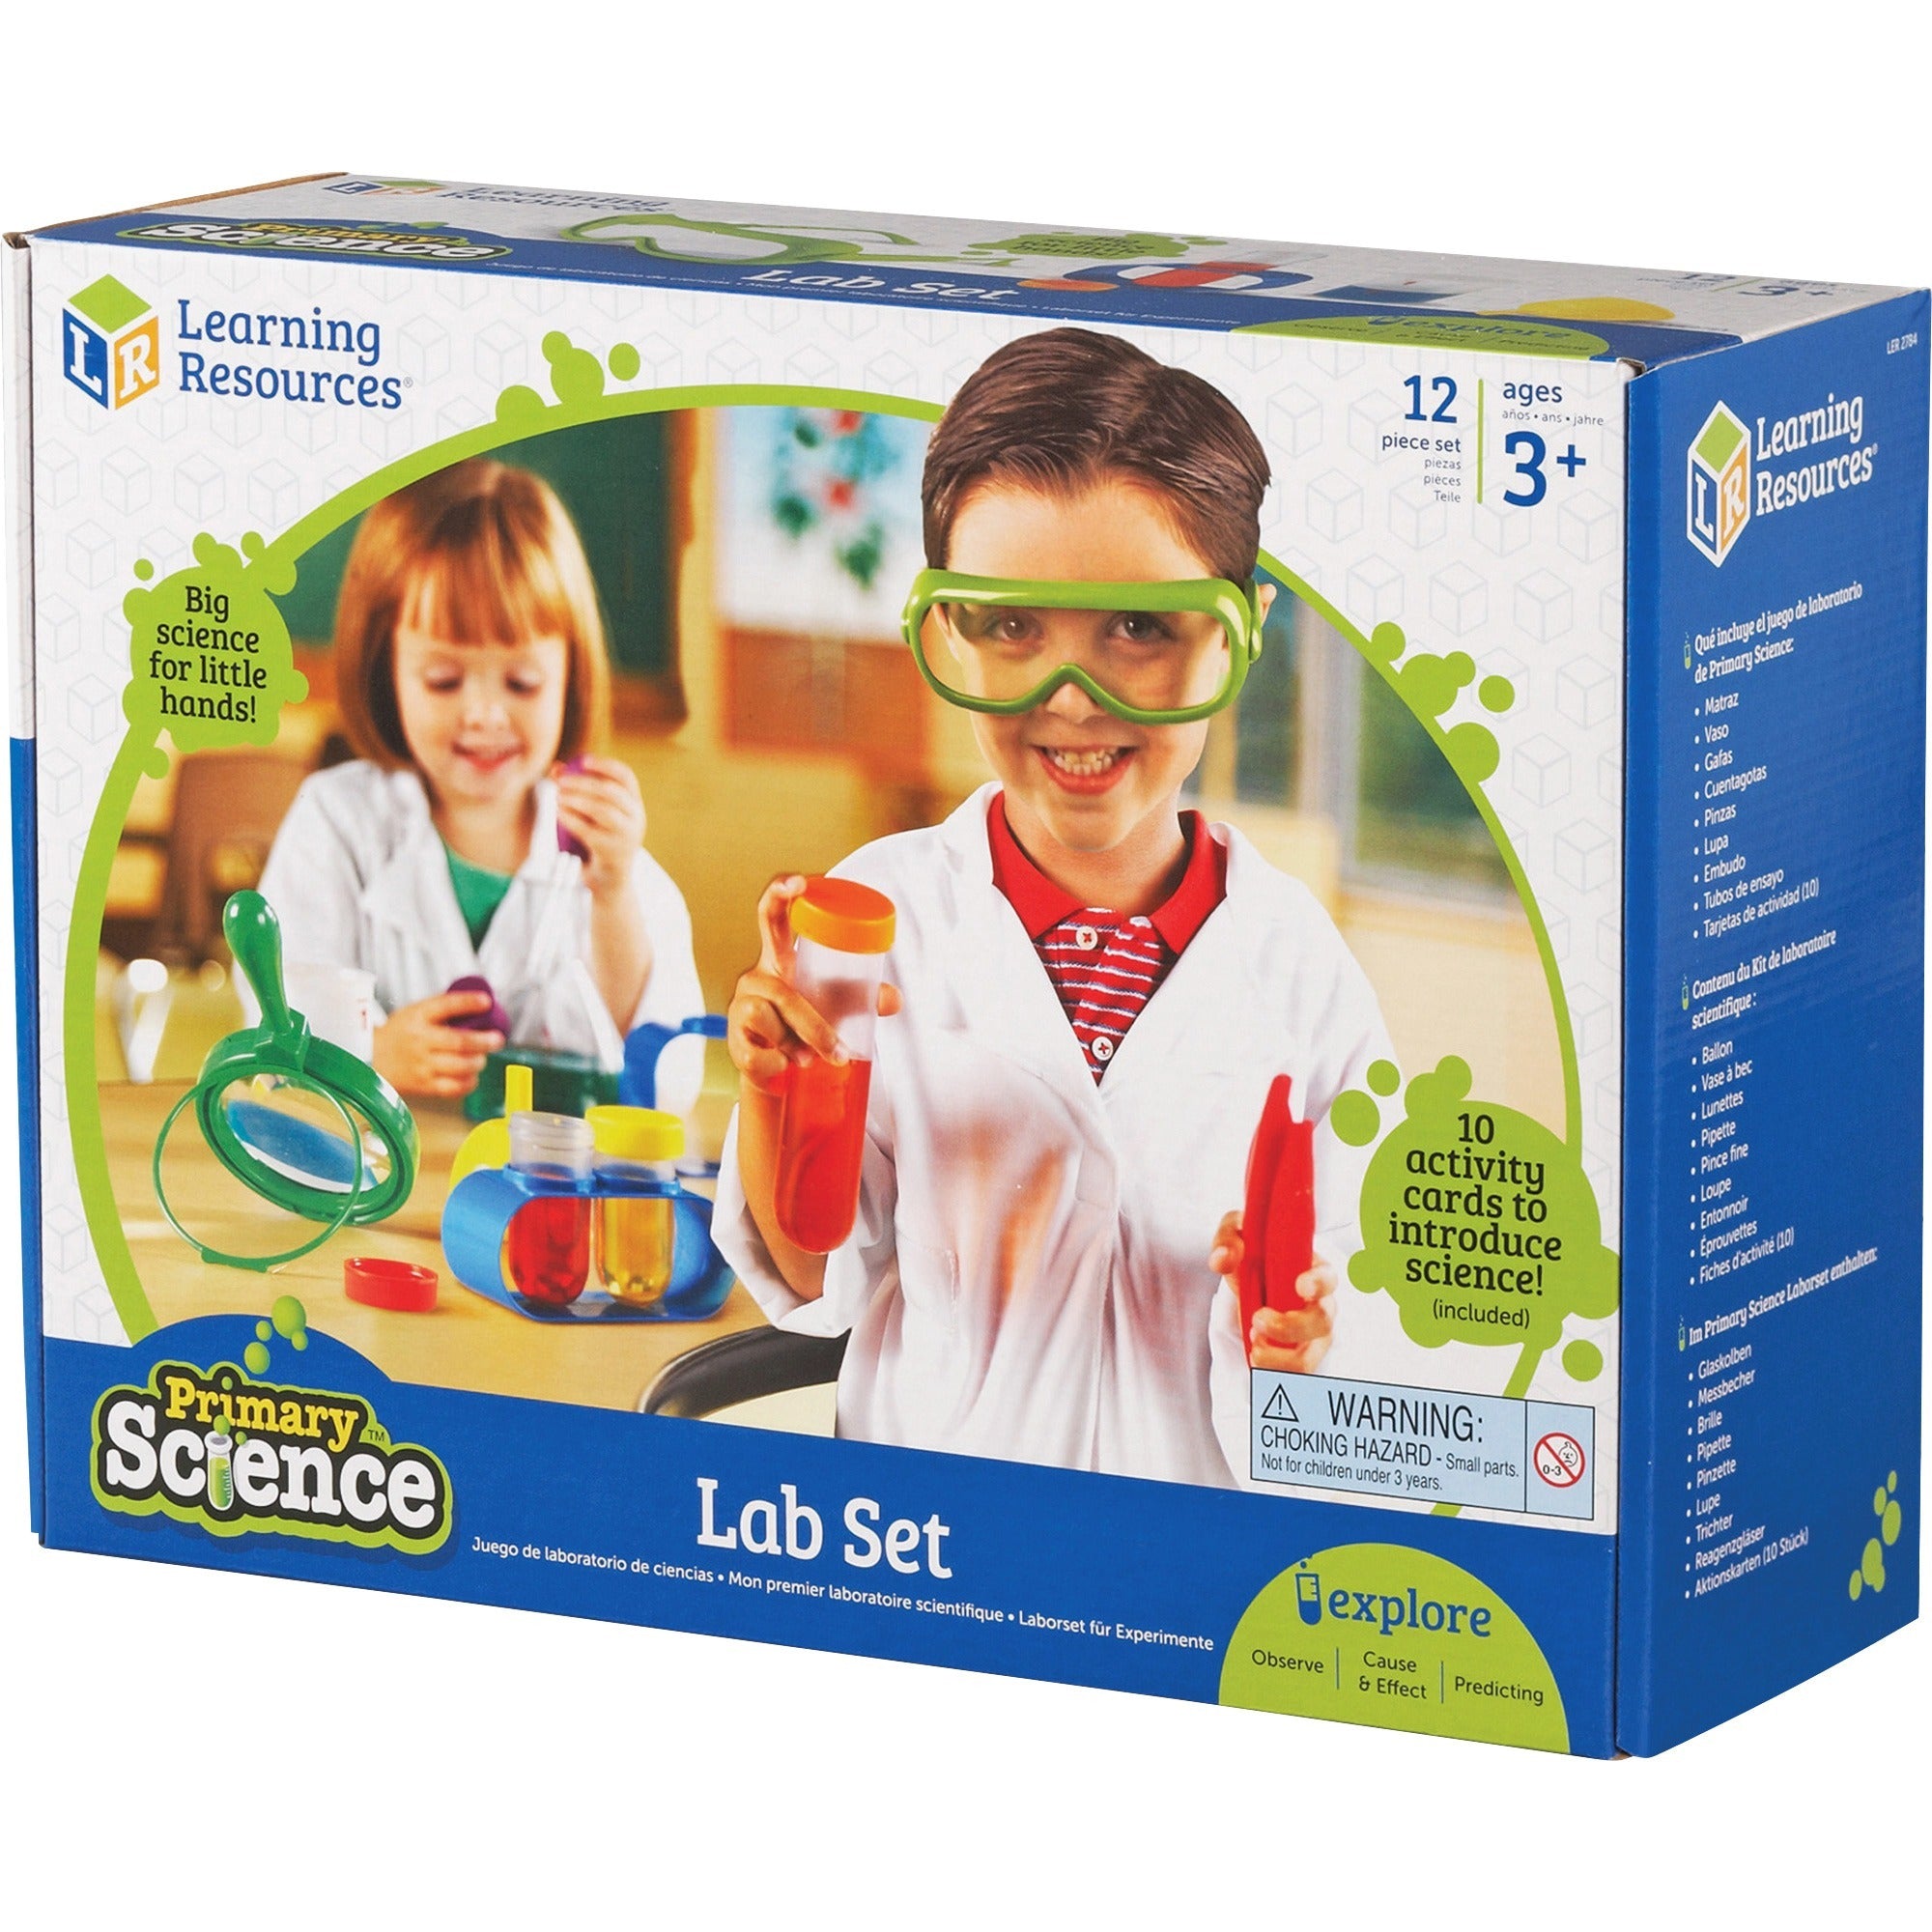 Learning Resources - Primary Science Lab Set - 1 / Set - 3 Year - Assorted - Plastic, Glass - 